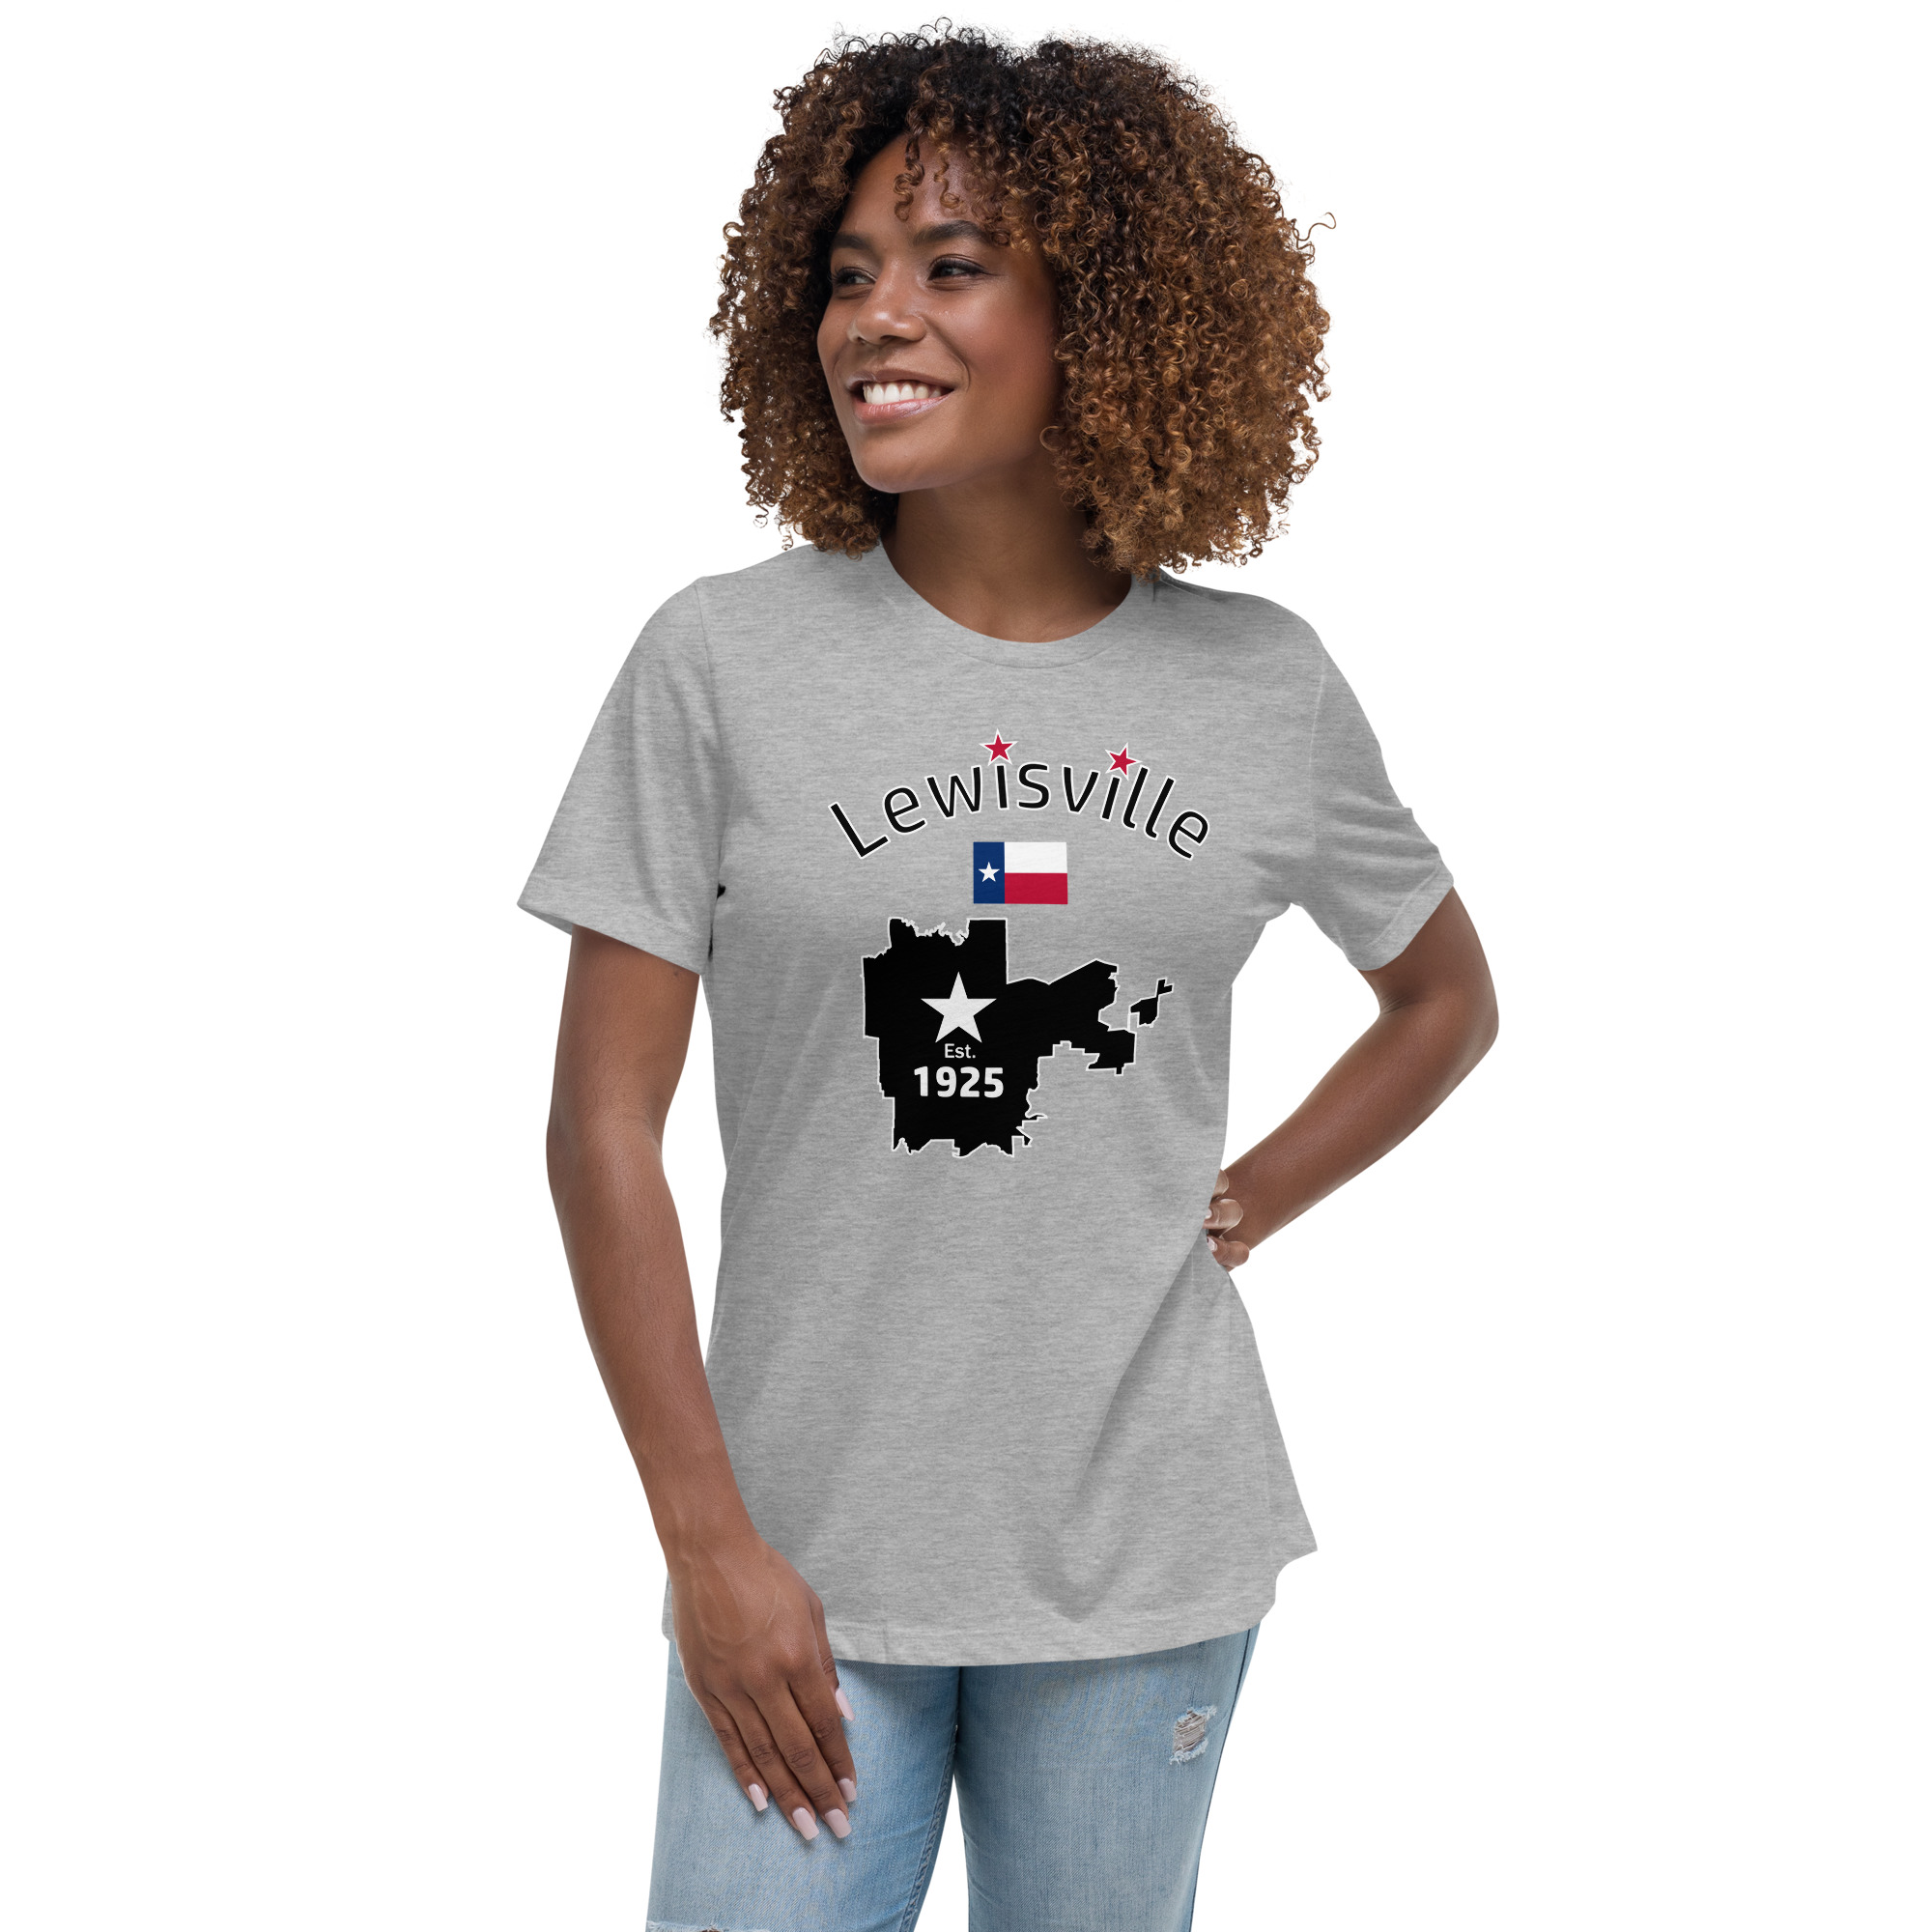 Smiling woman in a Women's Lewisville Heritage Tee with a Texas map design.